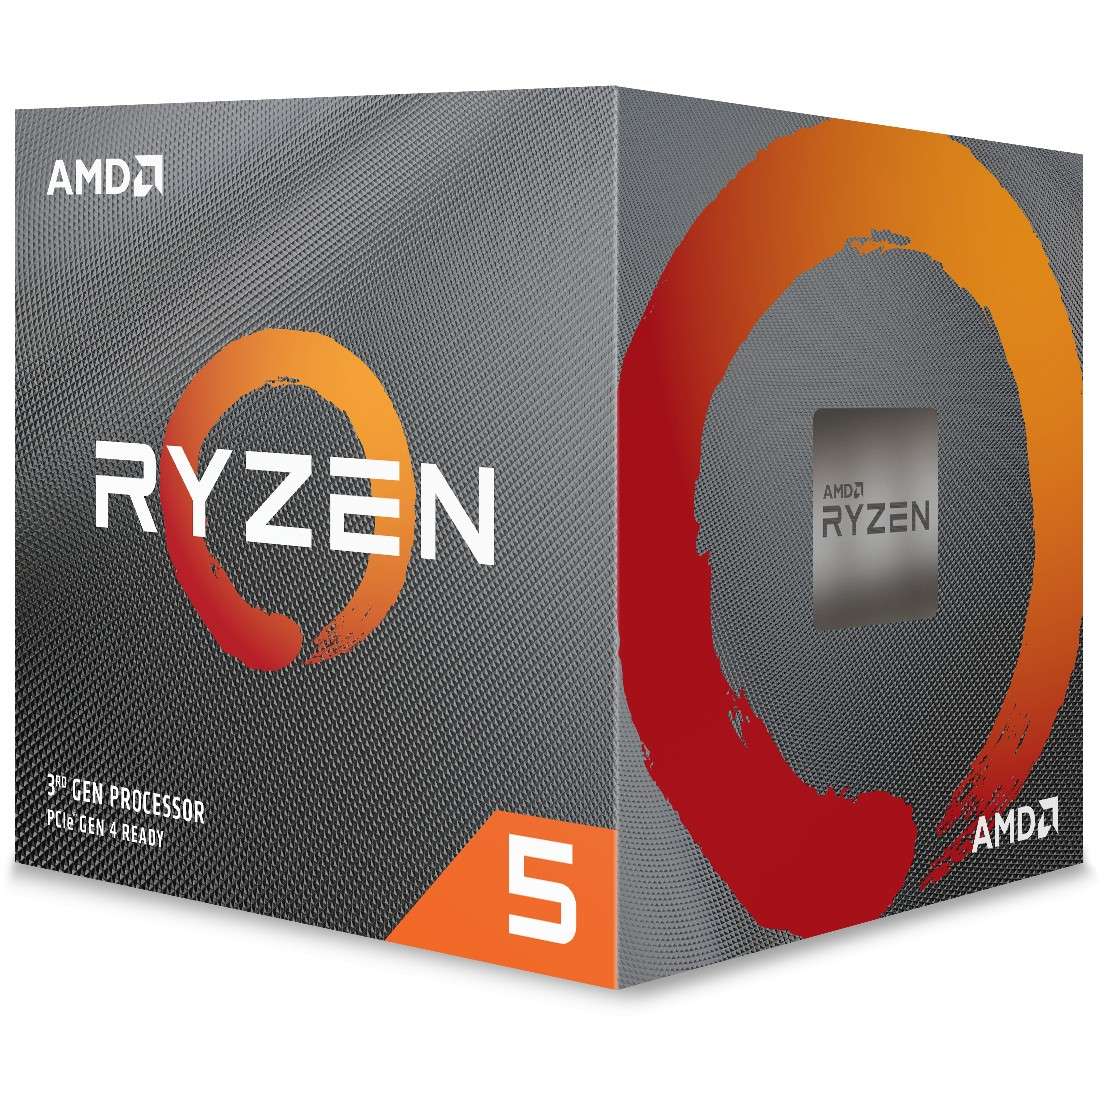 AMD AM4 Ryzen 5 6 Core Box 3600 3,6 GHz MAX Boost 4,2GHz 6xCore 32MB 95W with Wraith Stealth Cooler 7nm